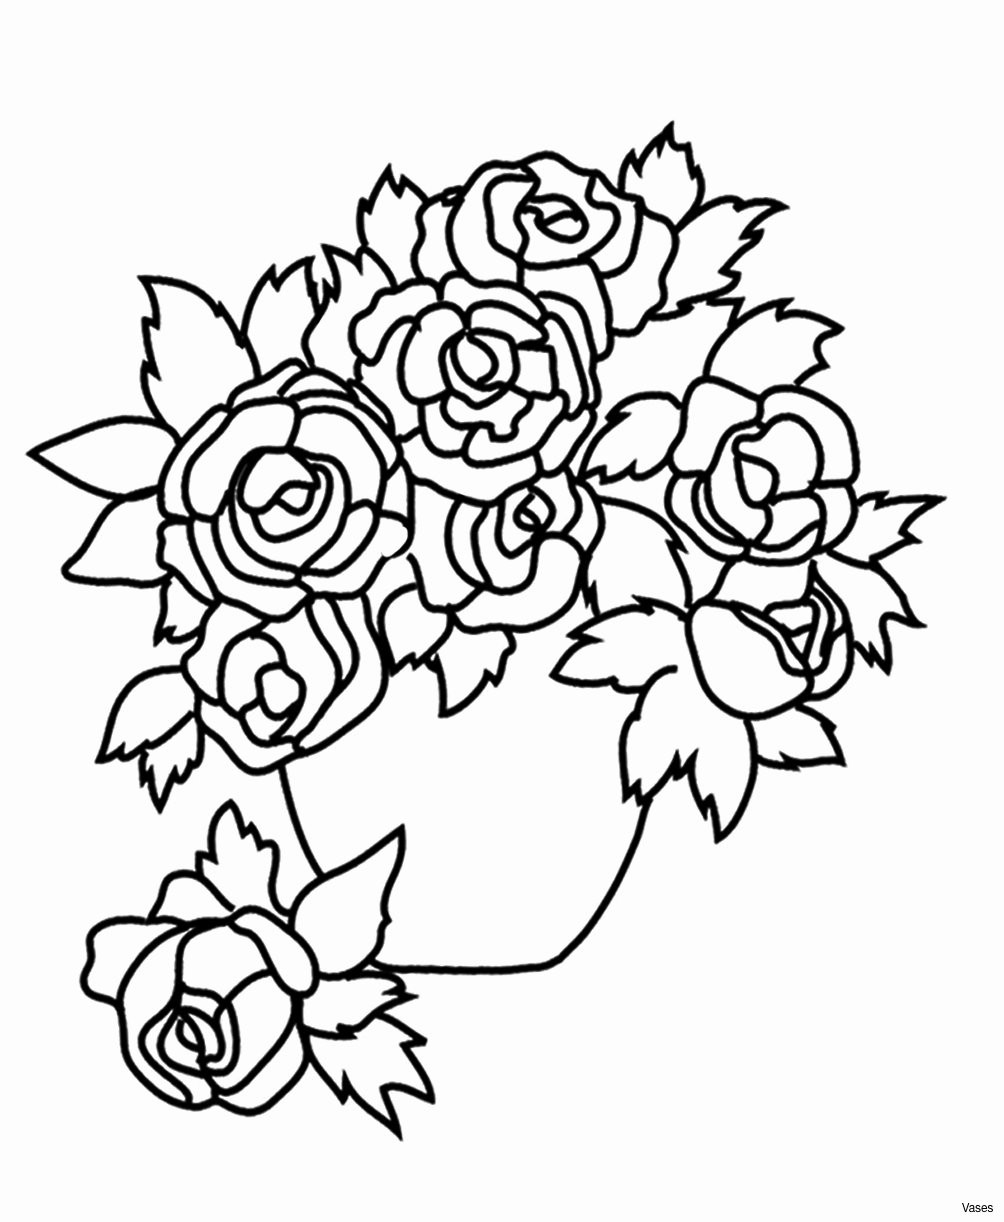 17 Famous How to Make A Flower Vase at Home 2024 free download how to make a flower vase at home of unique cool vases flower vase coloring page pages flowers in a top i throughout unique cool vases flower vase coloring page pages flowers in a top i 0d